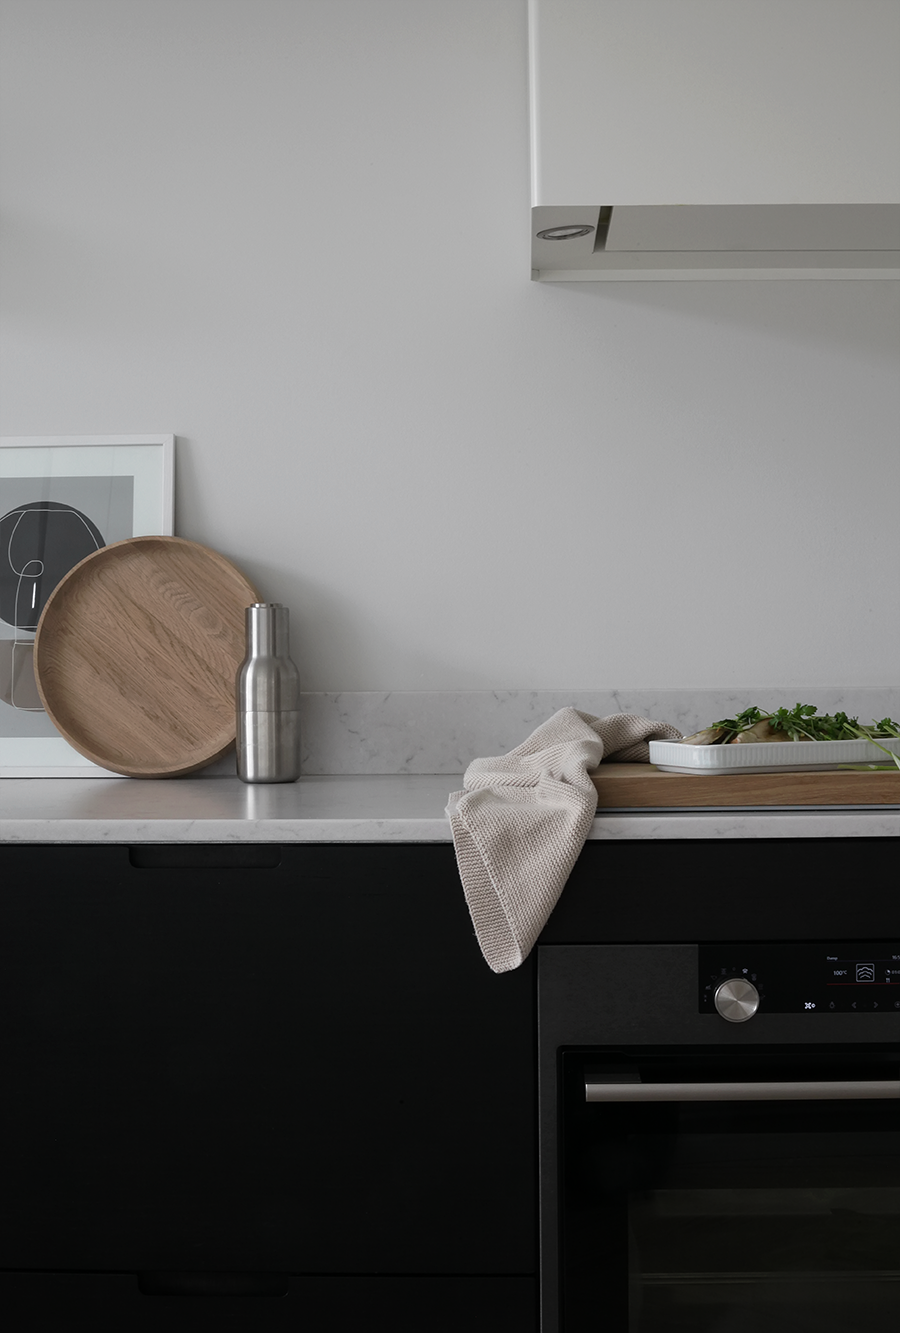 COOK LIKE THE CHEFS WITH NEW ASKO CRAFT BLACK STEEL OVEN